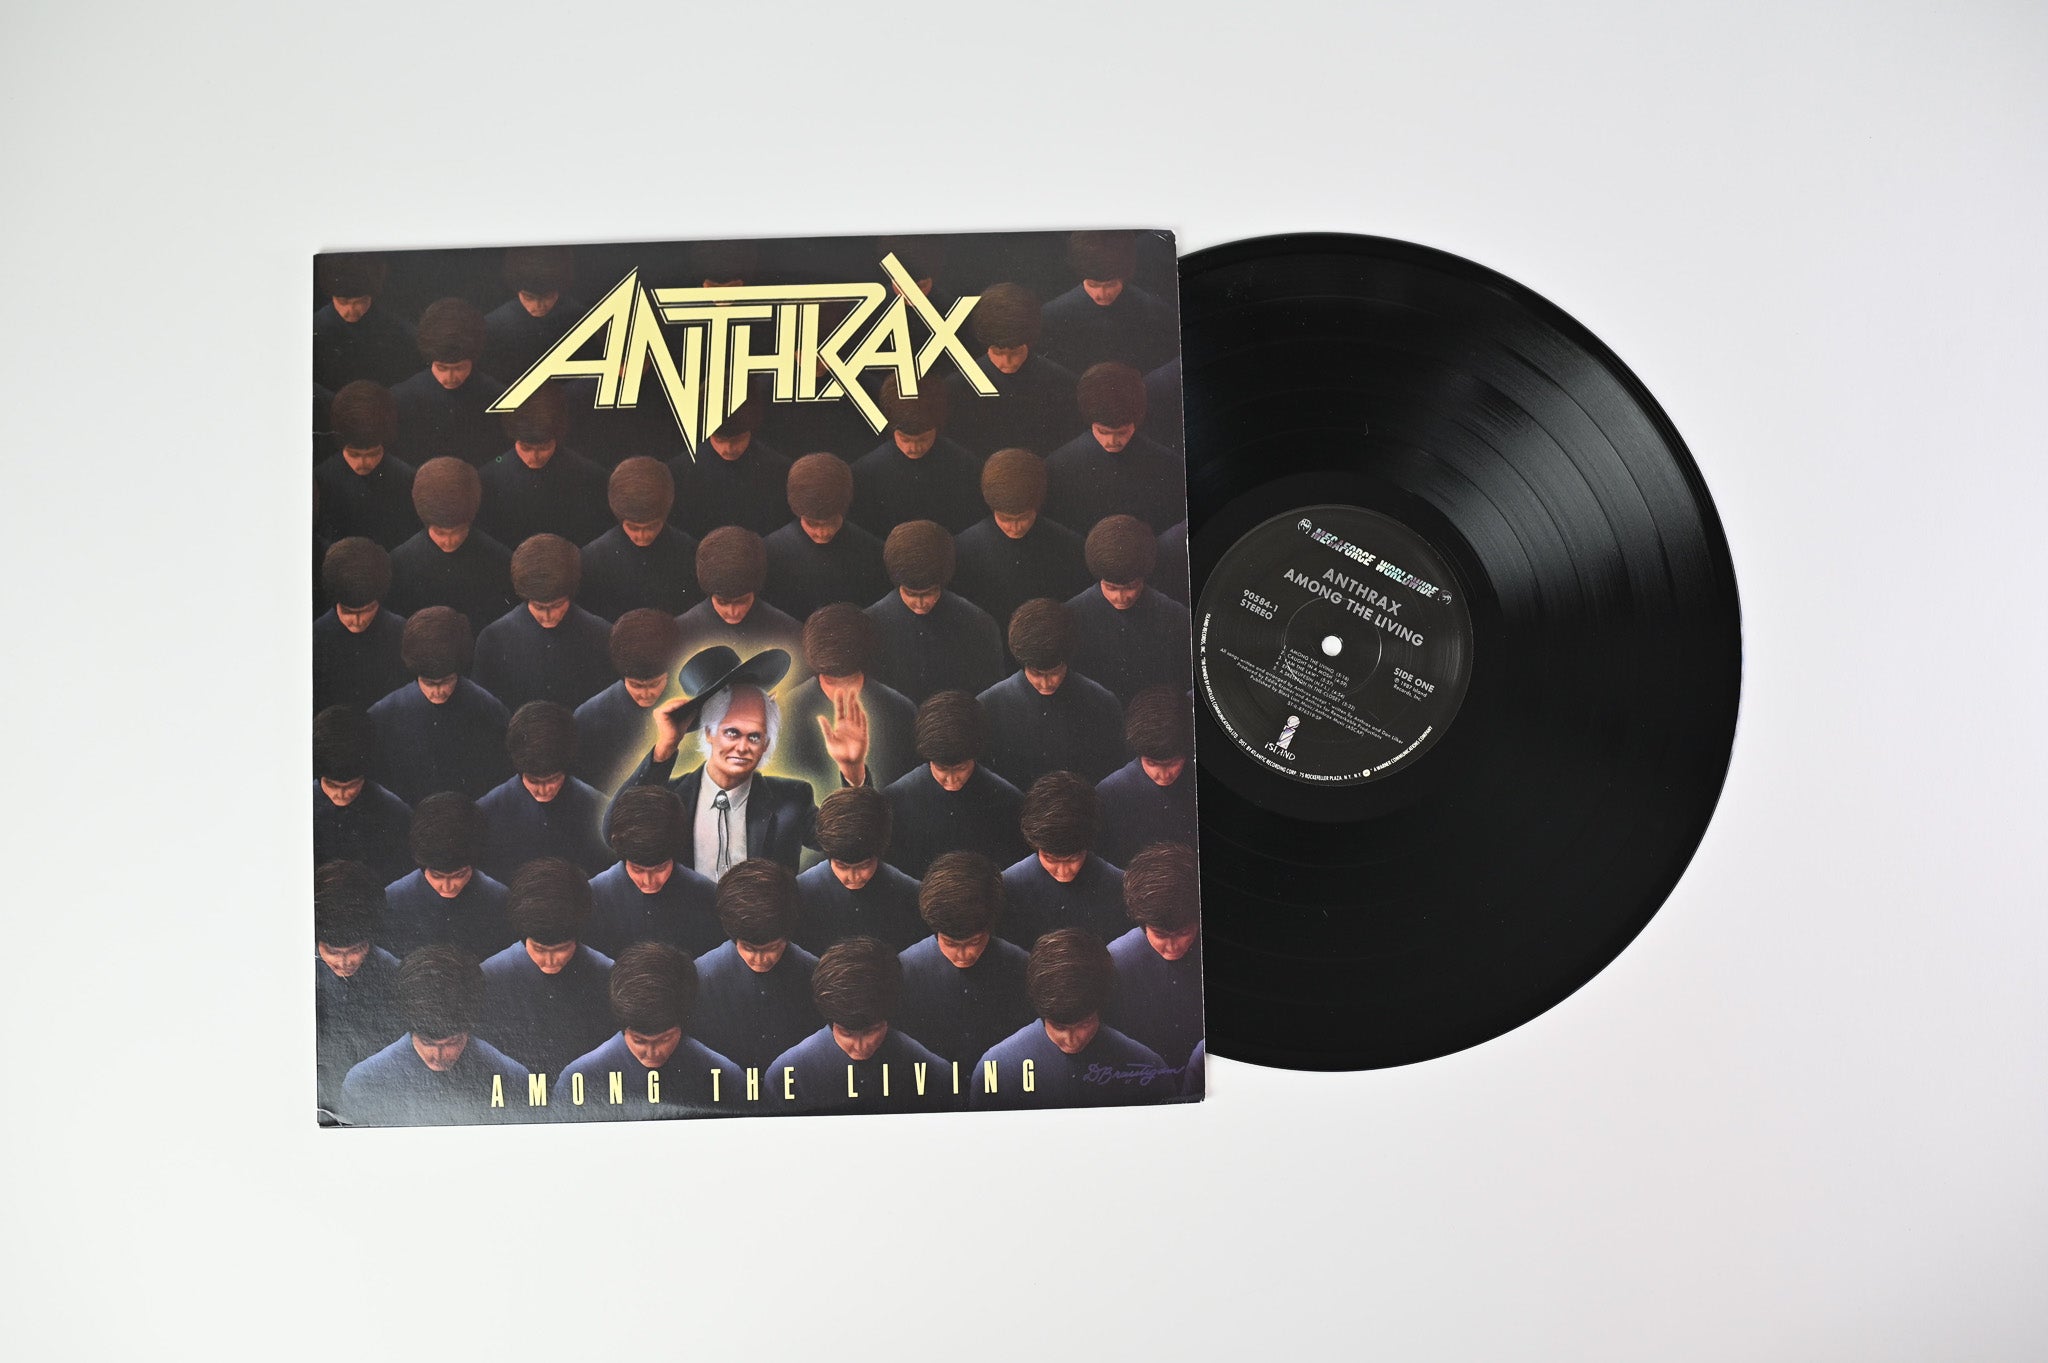 Anthrax - Among The Living on Island Records/Megaforce Worldwide